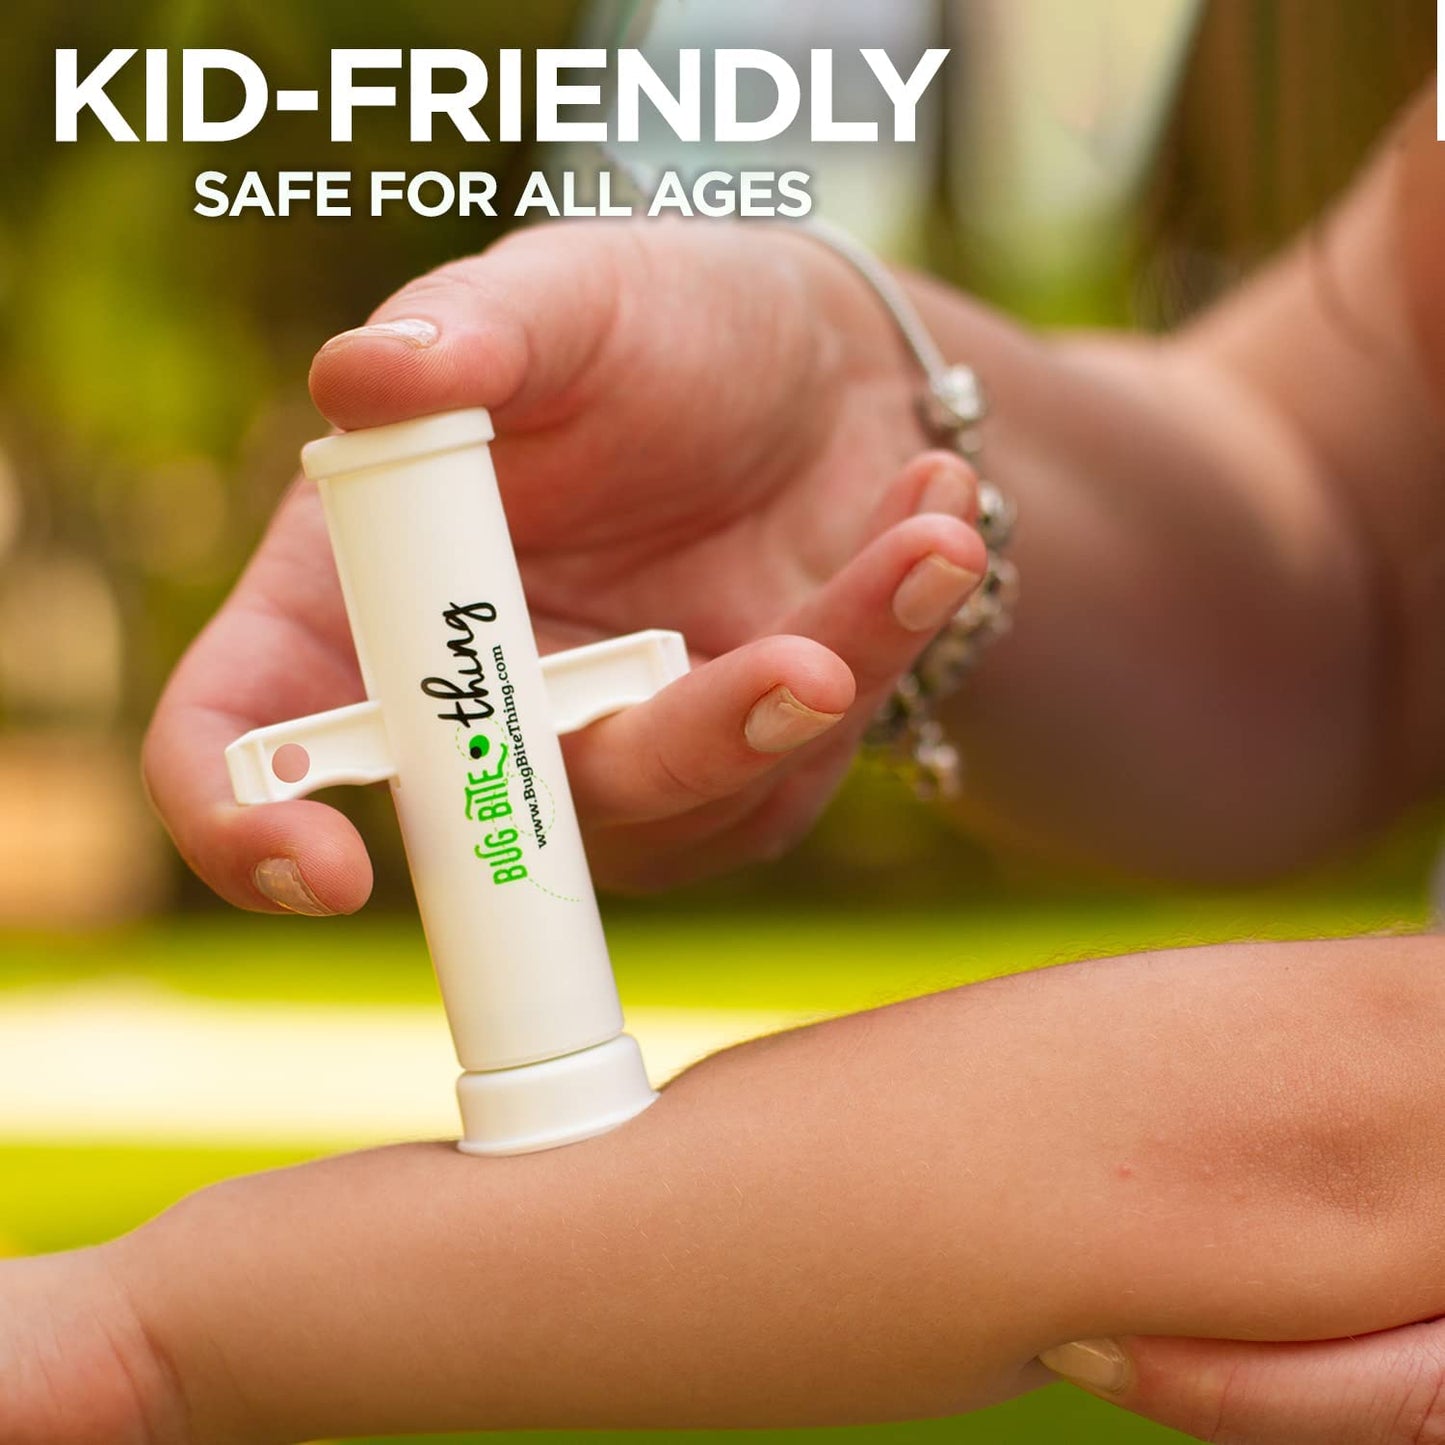 A person is pressing a gadget into a child's arm. The device helps to alleviate the pain from bug bites. The text reads, 'Kid-friendly safe for all ages.'